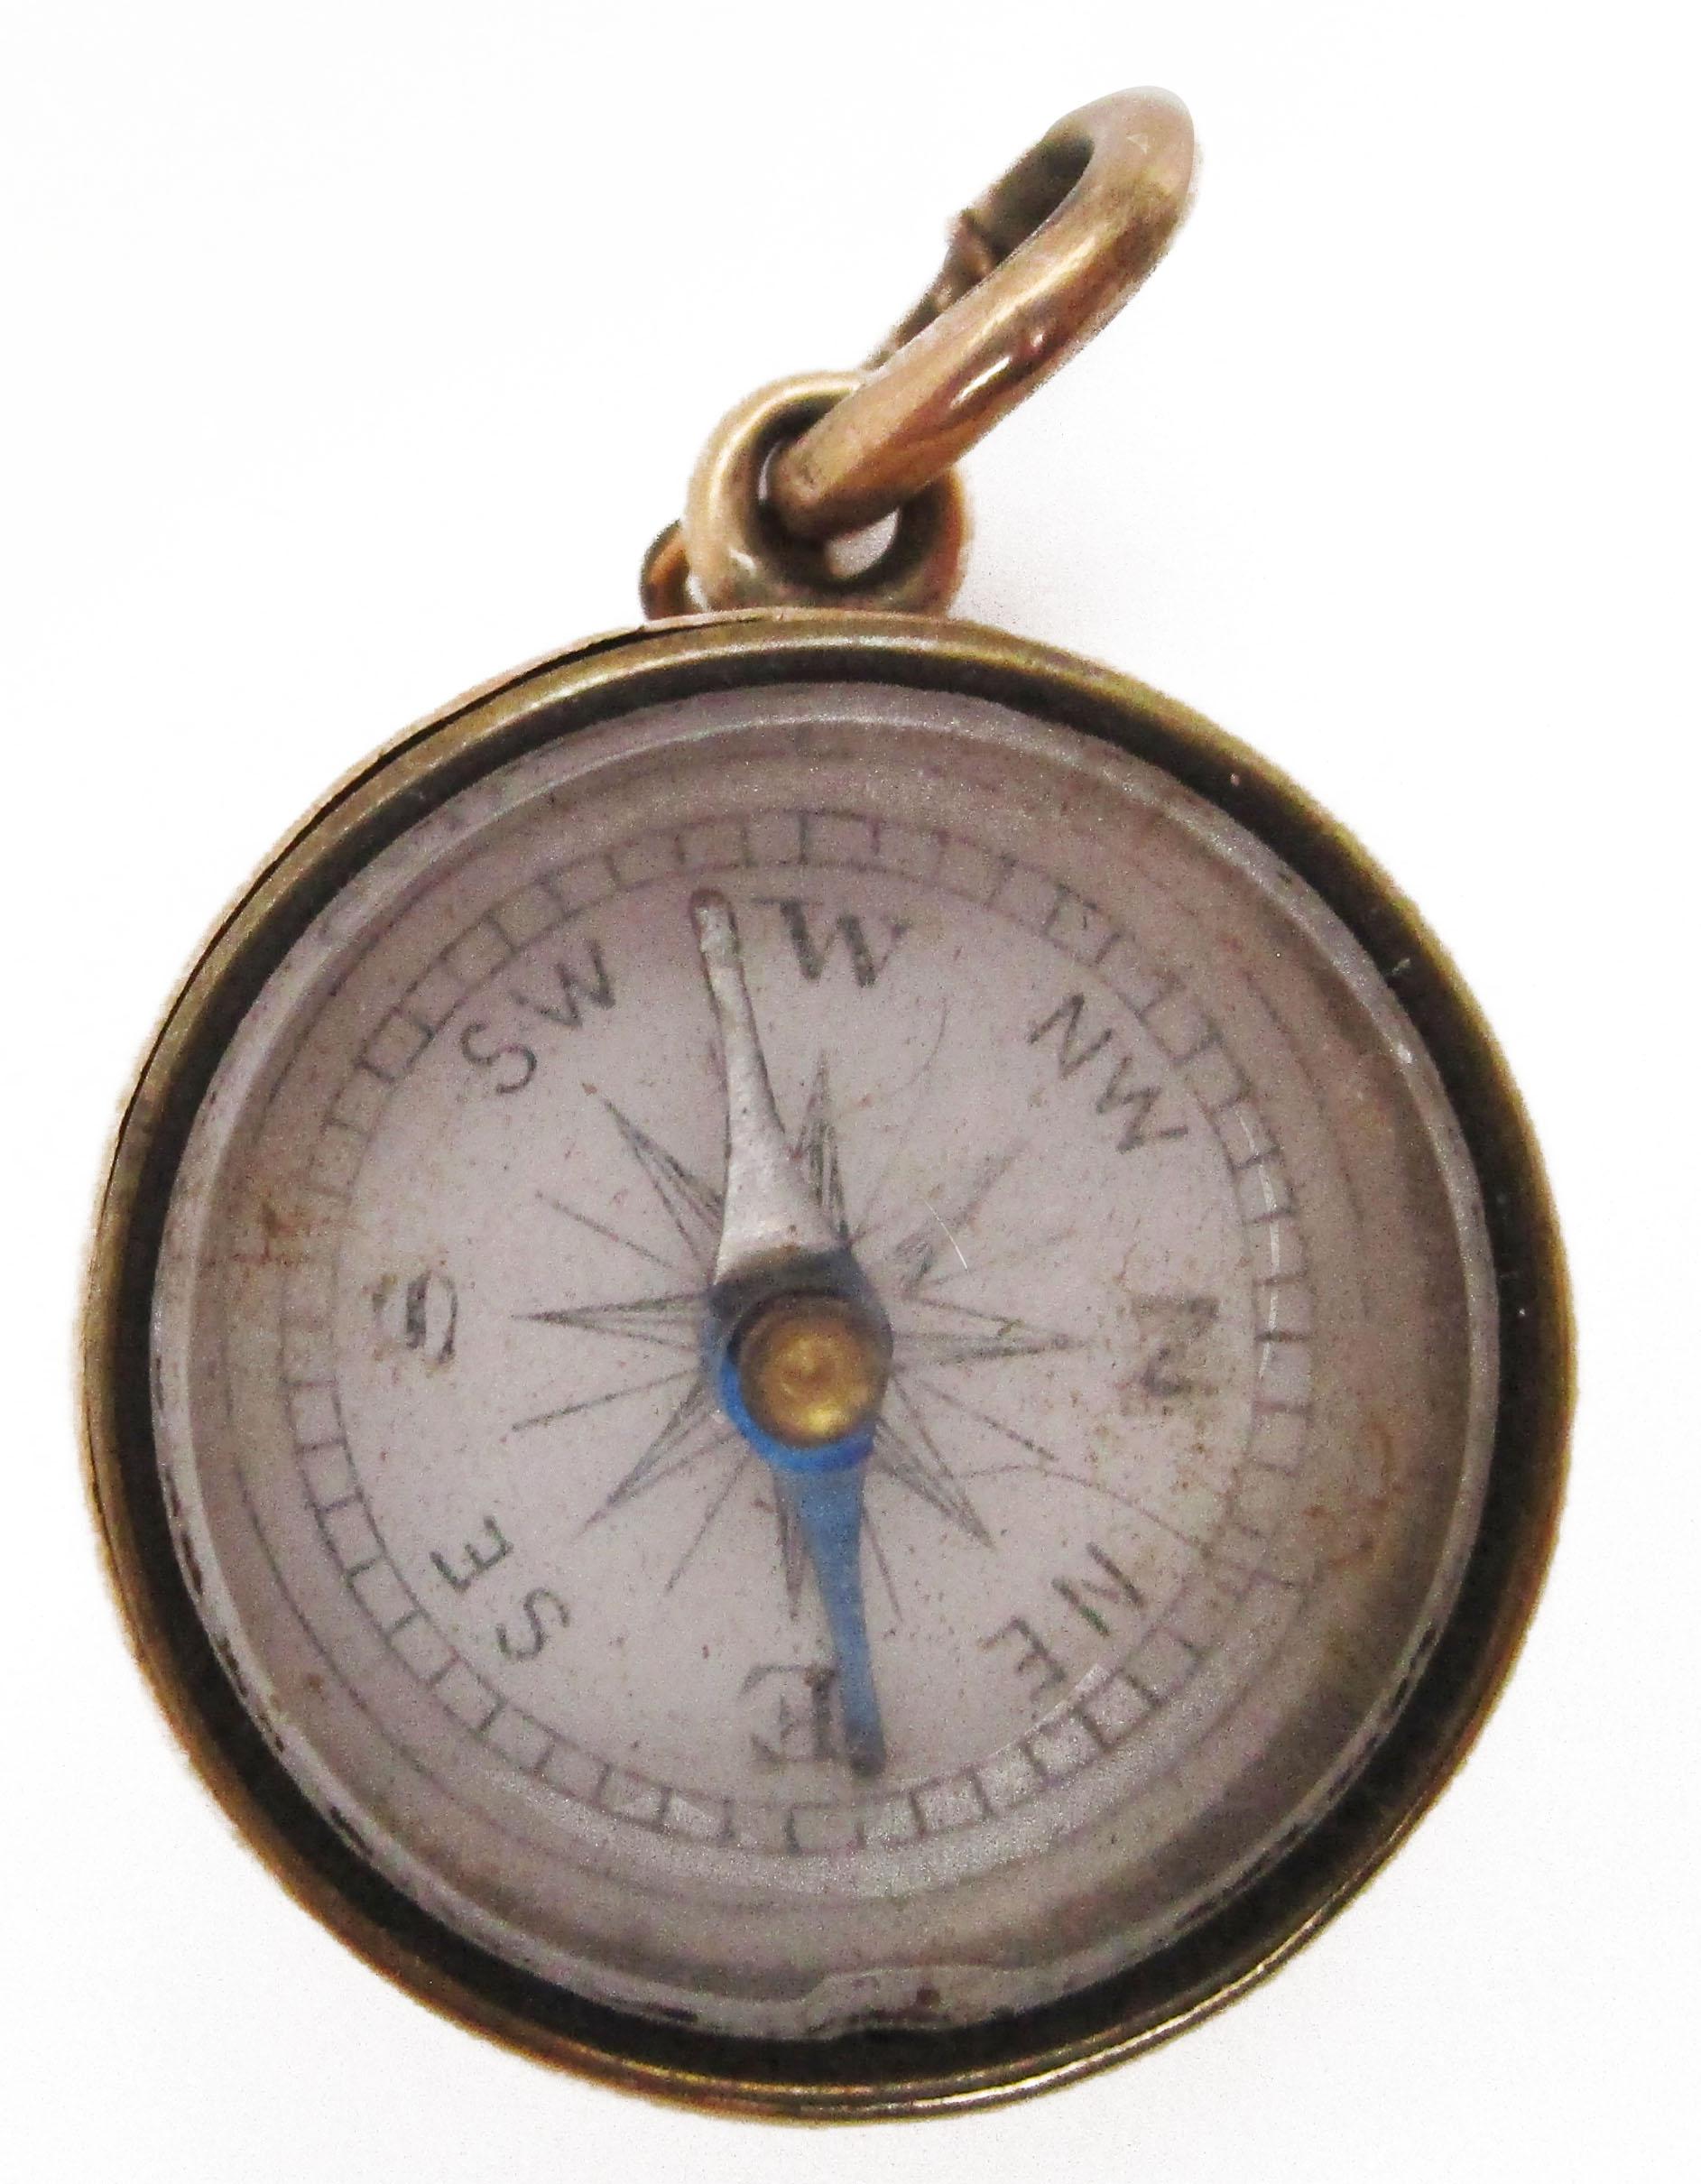 This incredible Victorian watch fob dates back to 1880 and is a stunning 14k rose gold compass! The aged metal is in excellent shape and has a unique finish that only comes with antique jewelry. The compass itself is still in great working